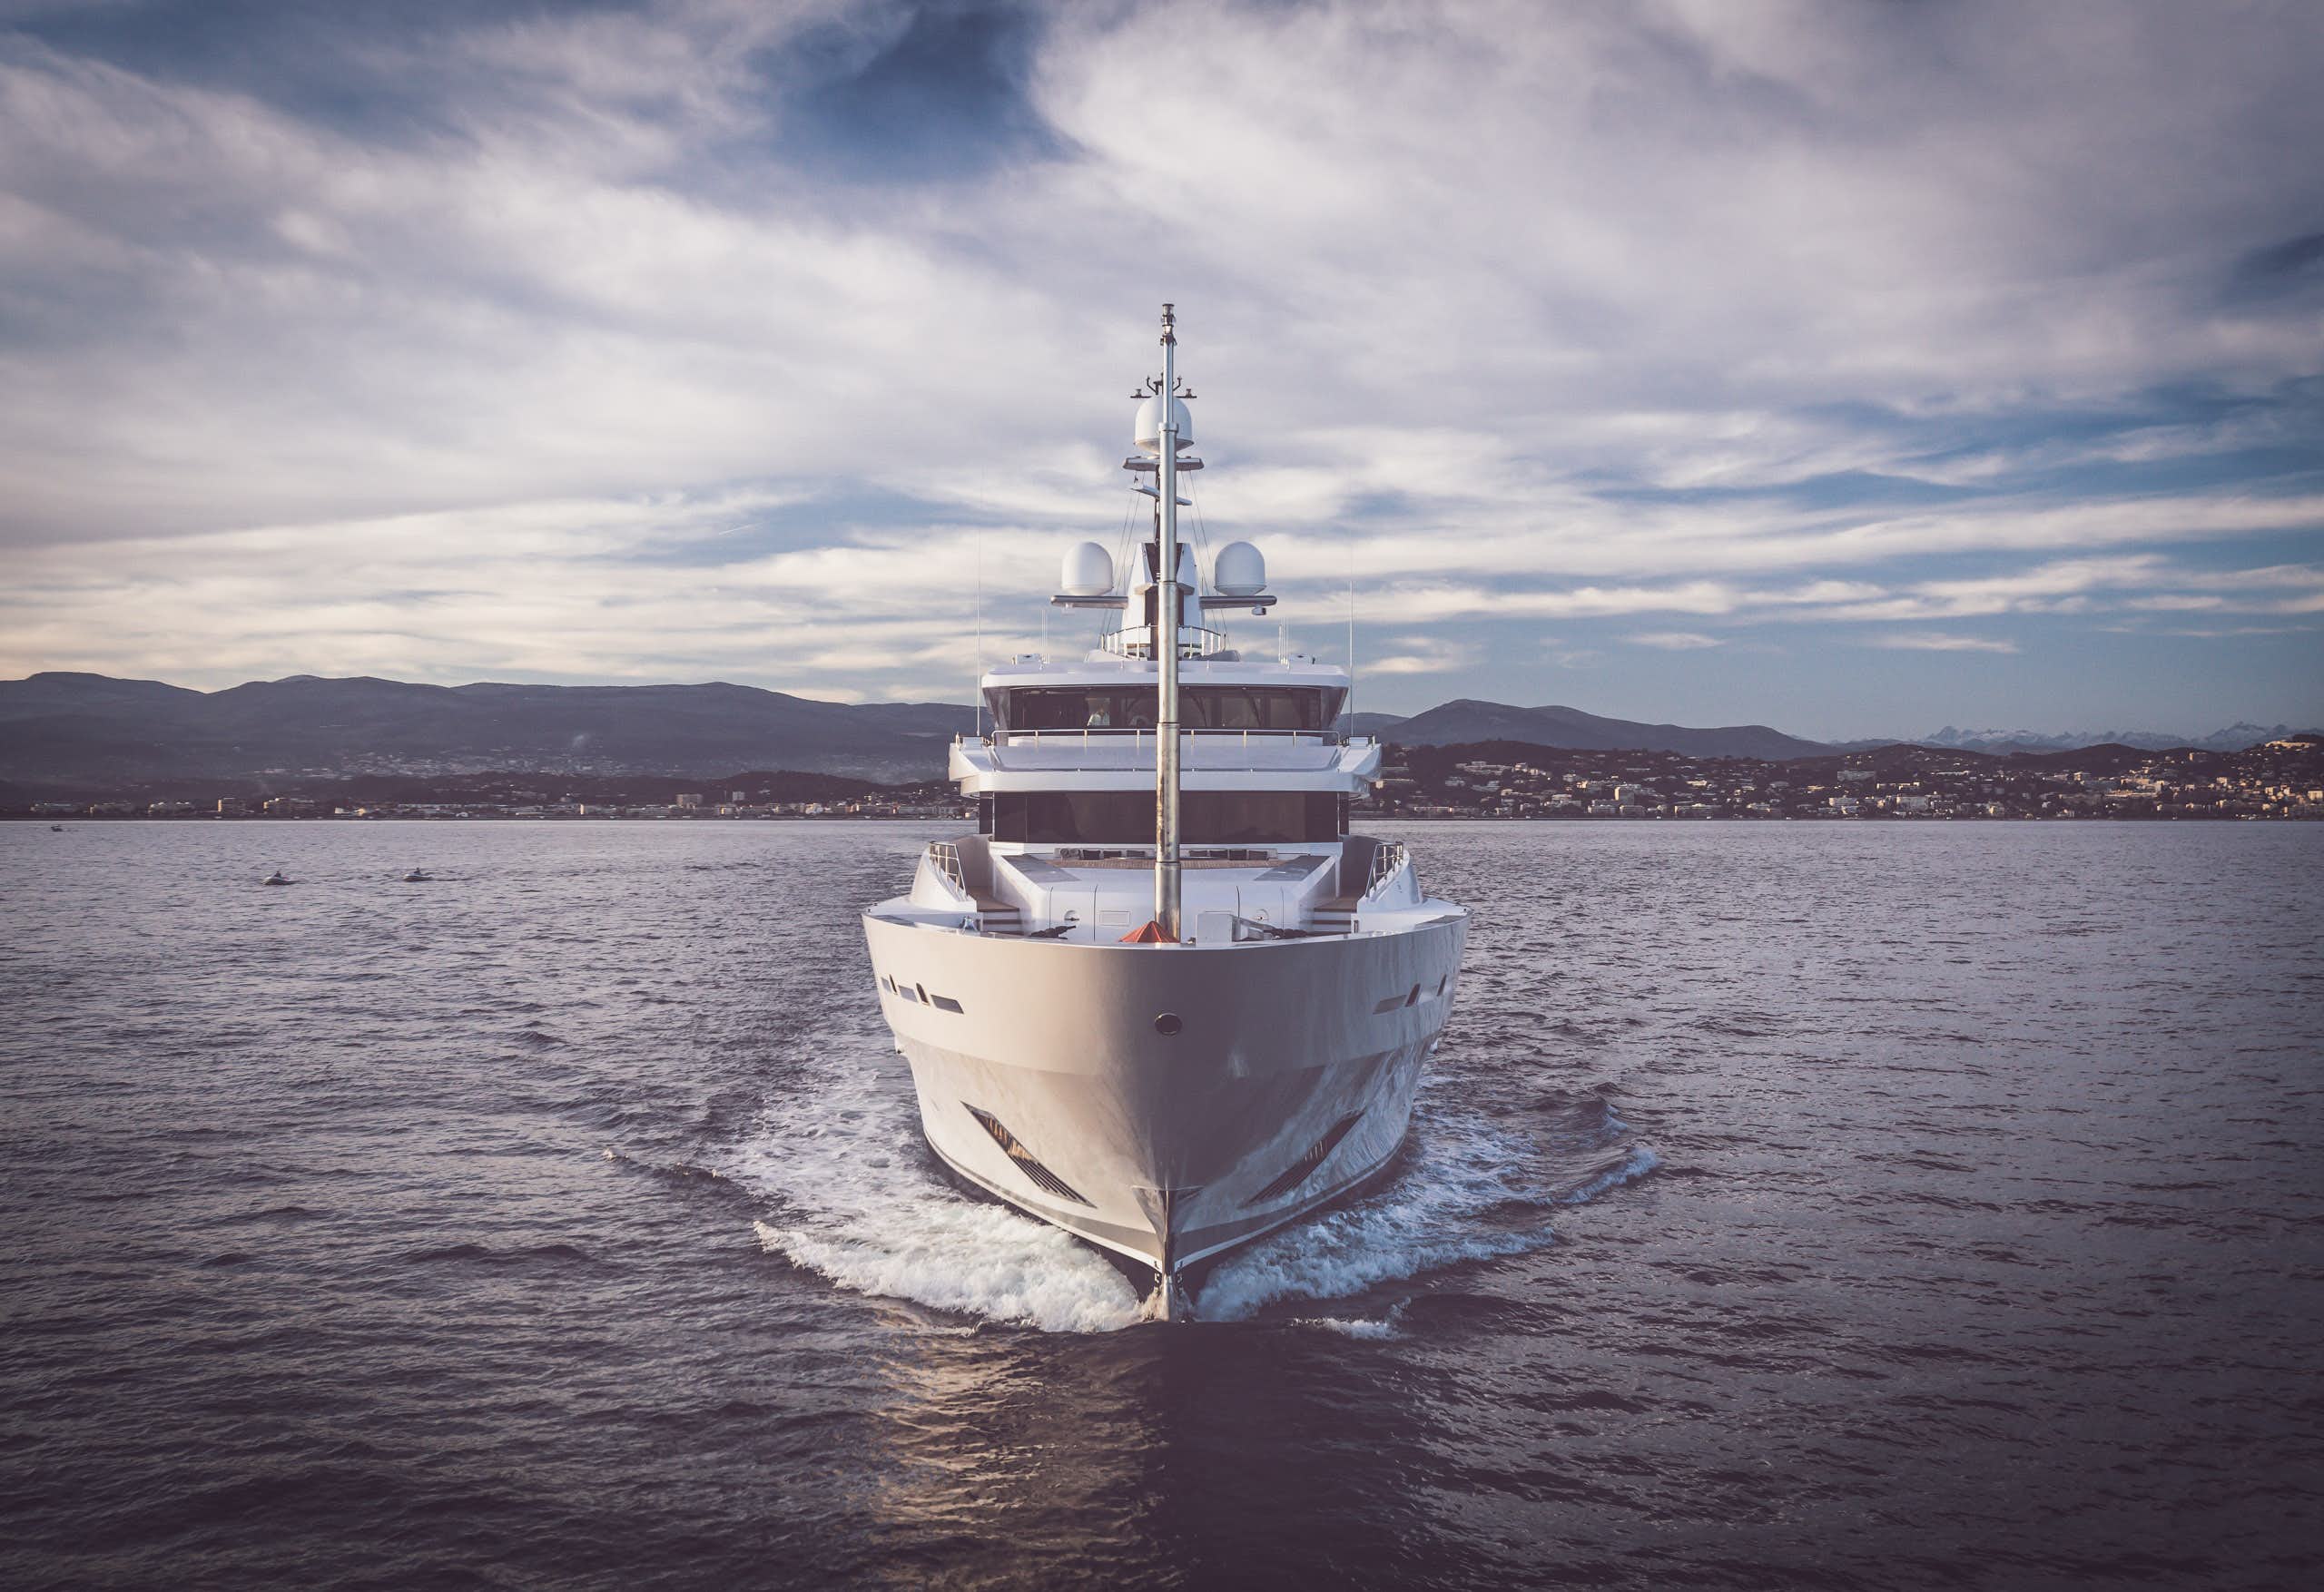 Superyacht cruising in the direction of the camera